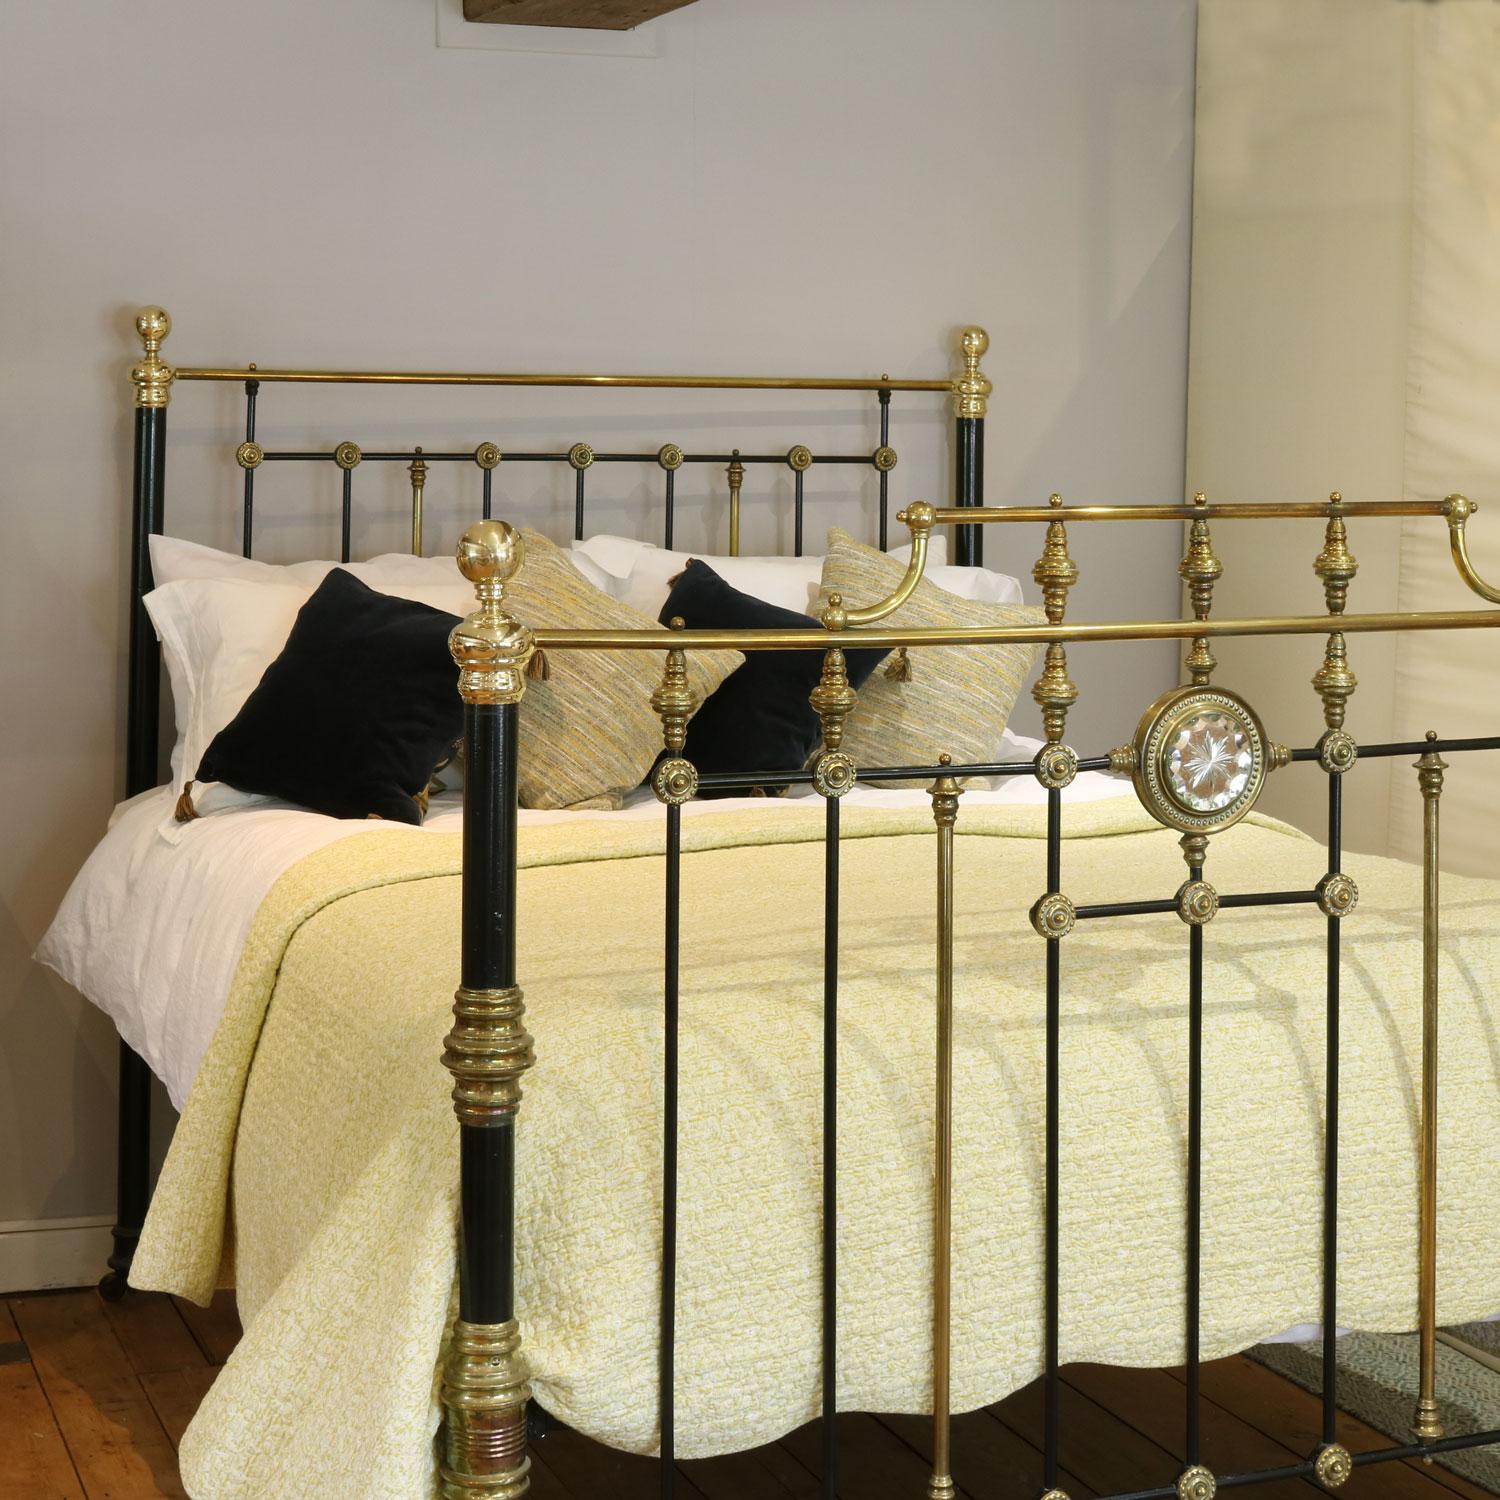 Splendid Victorian cast iron and brass bedstead in black with cut-glass mirror and a gallery in the foot panel. Highly decorative, with brass knee caps and side drops.

This bed accepts a UK king size or US queen size (5ft, 60in or 150cm wide) base